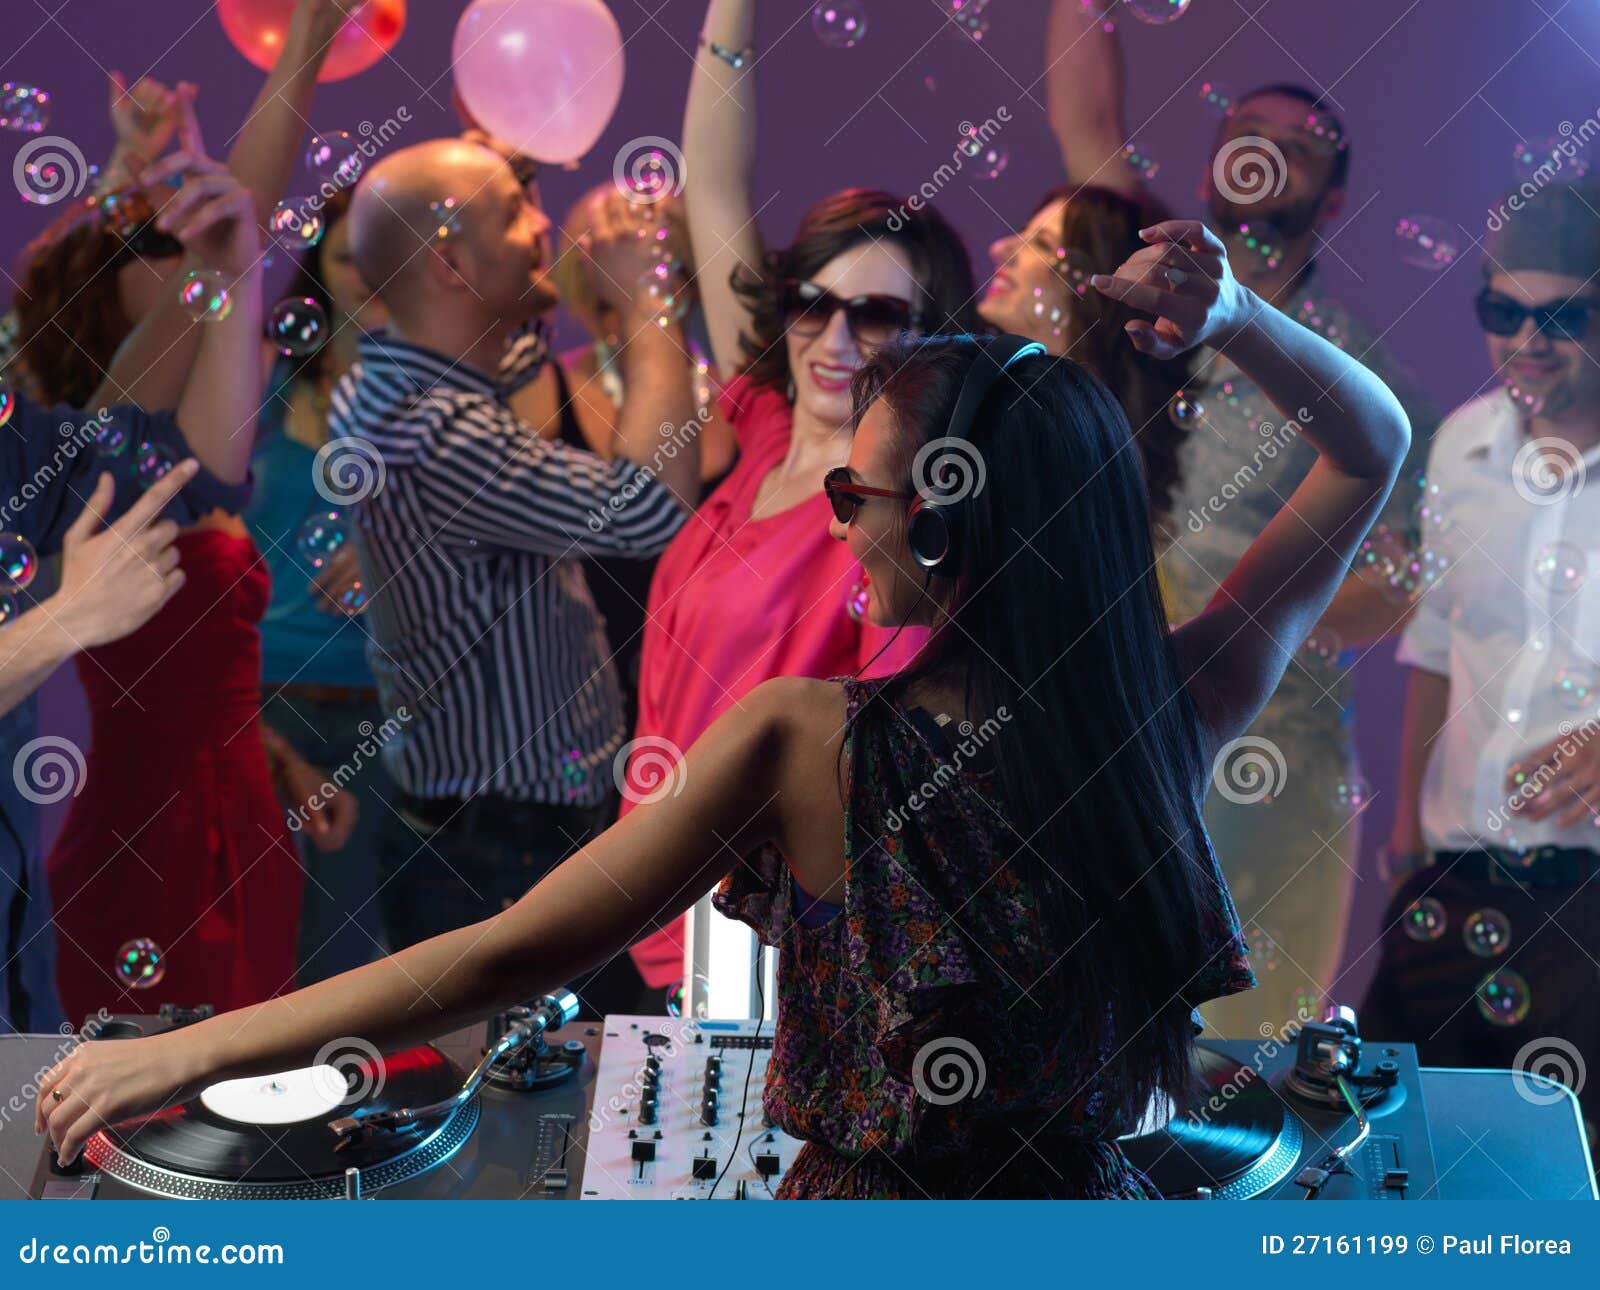 Happy Young People Dancing In Night Club Royalty Free Stock Images ...